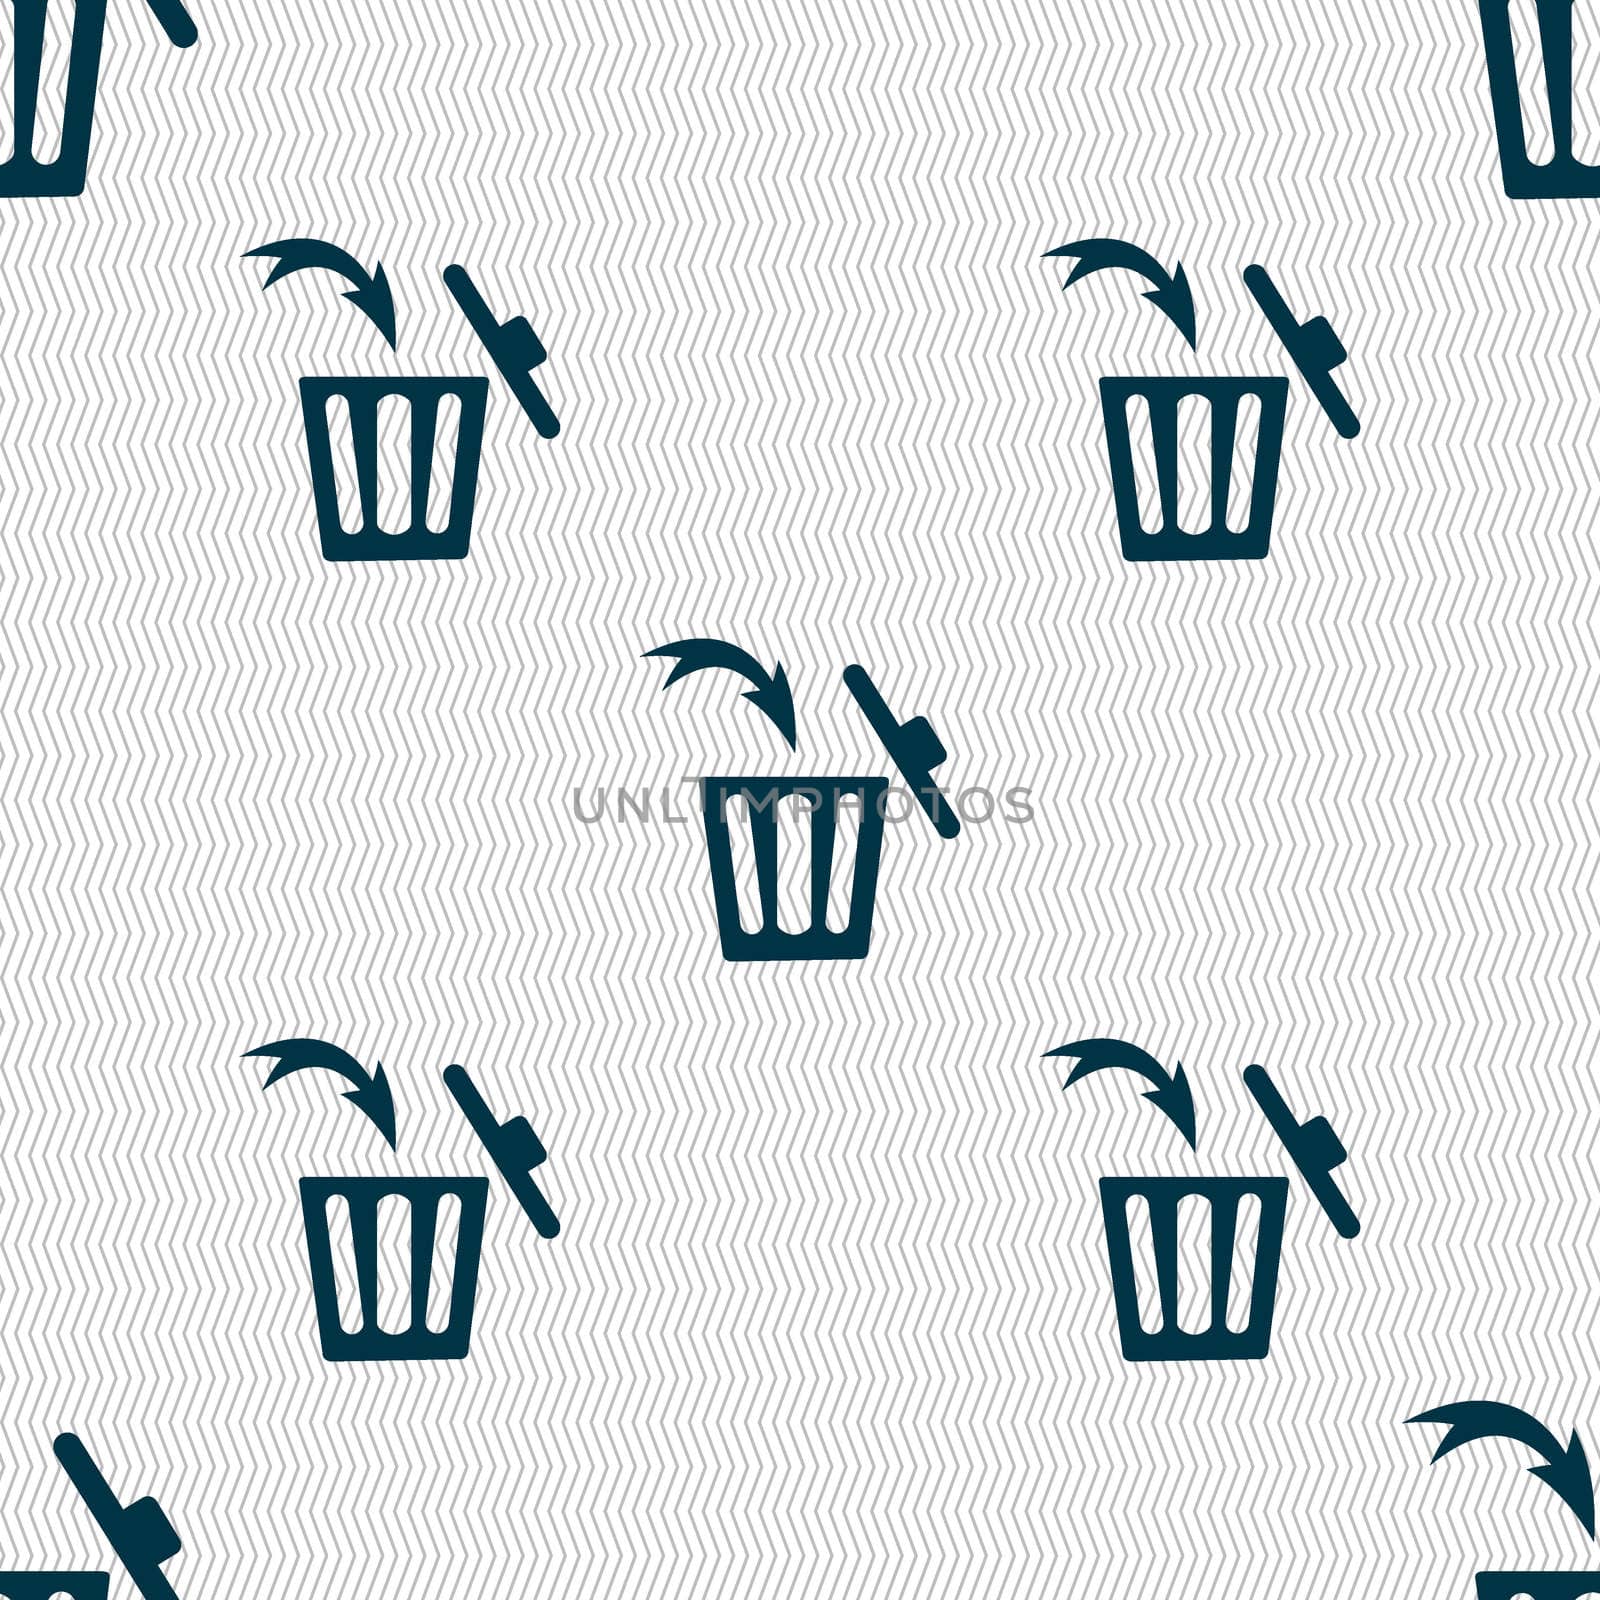 Recycle bin sign icon. Seamless abstract background with geometric shapes. illustration